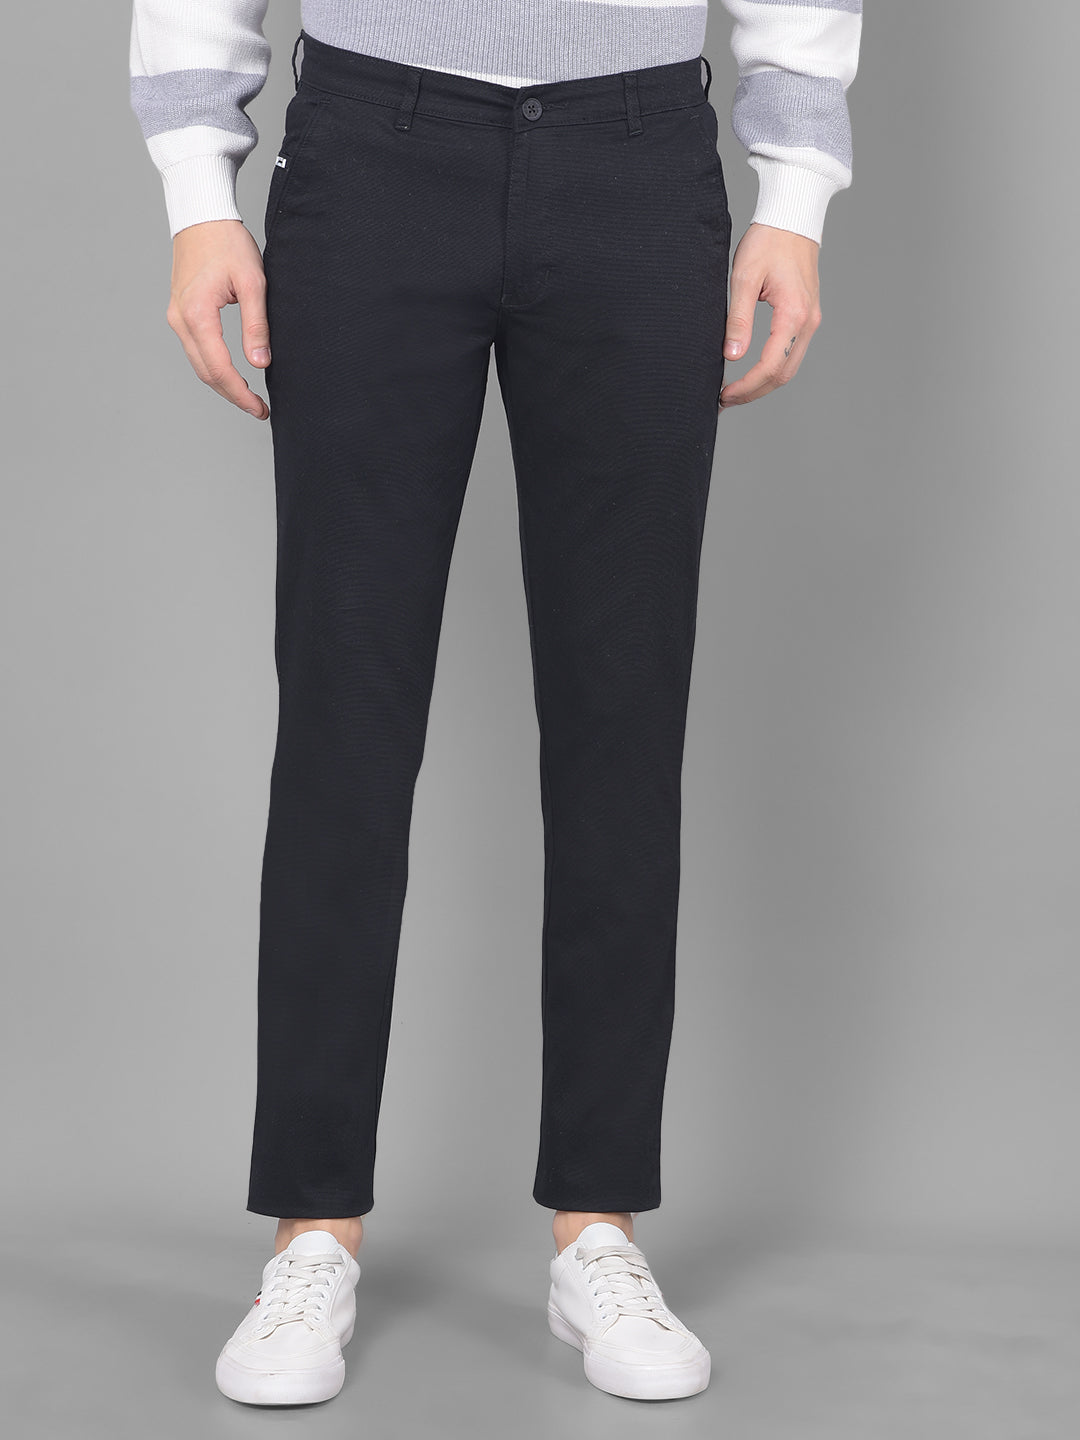 Casual Bottoms for Men - Buy Chinos, Trousers for Men Online at M&S India